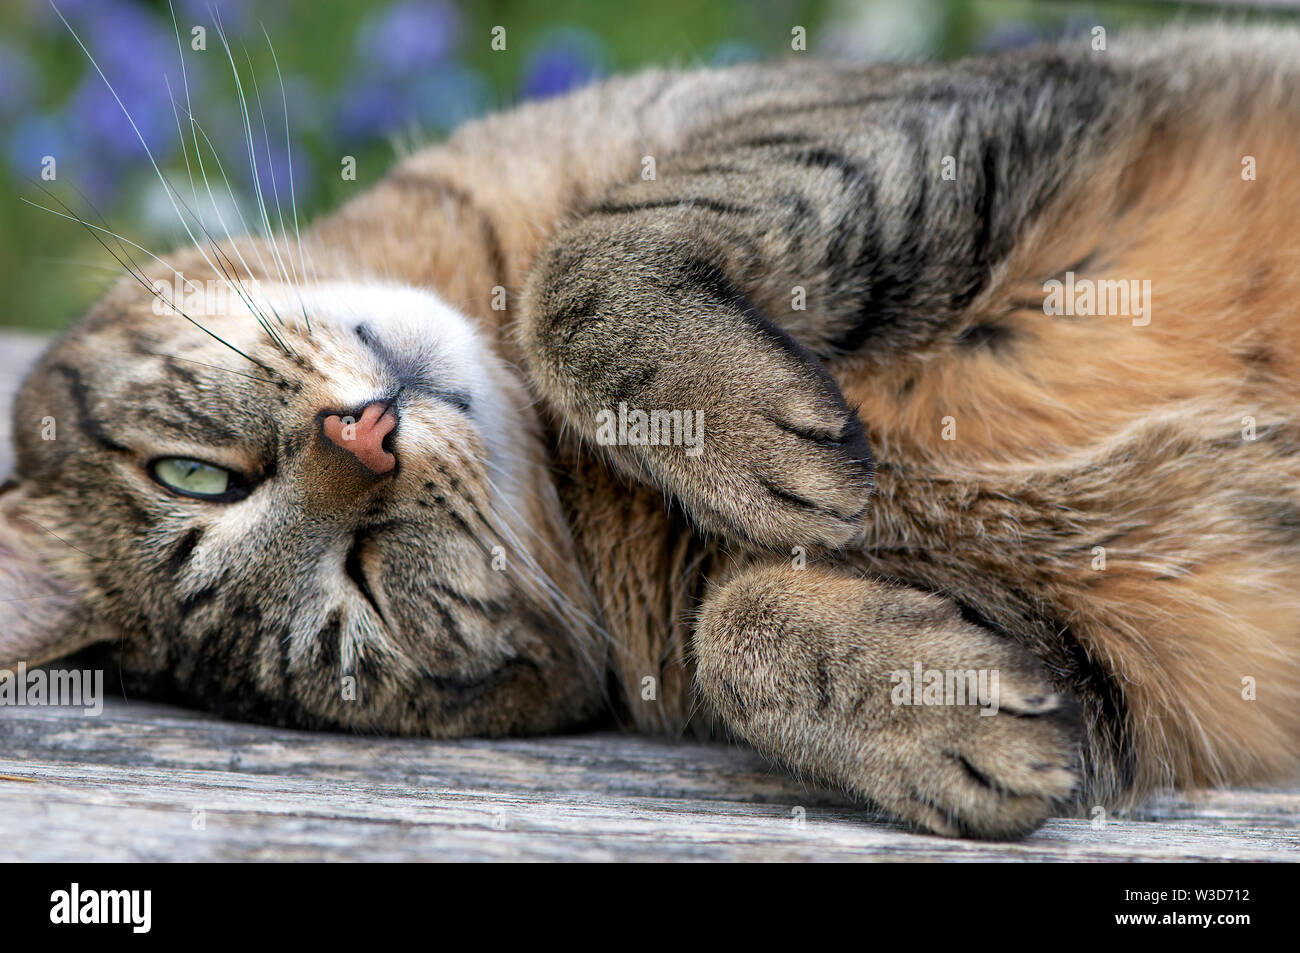 A Mackerel tabby cat (Felis catus) resting with head upside down and one eye open and paws folded. Stock Photo